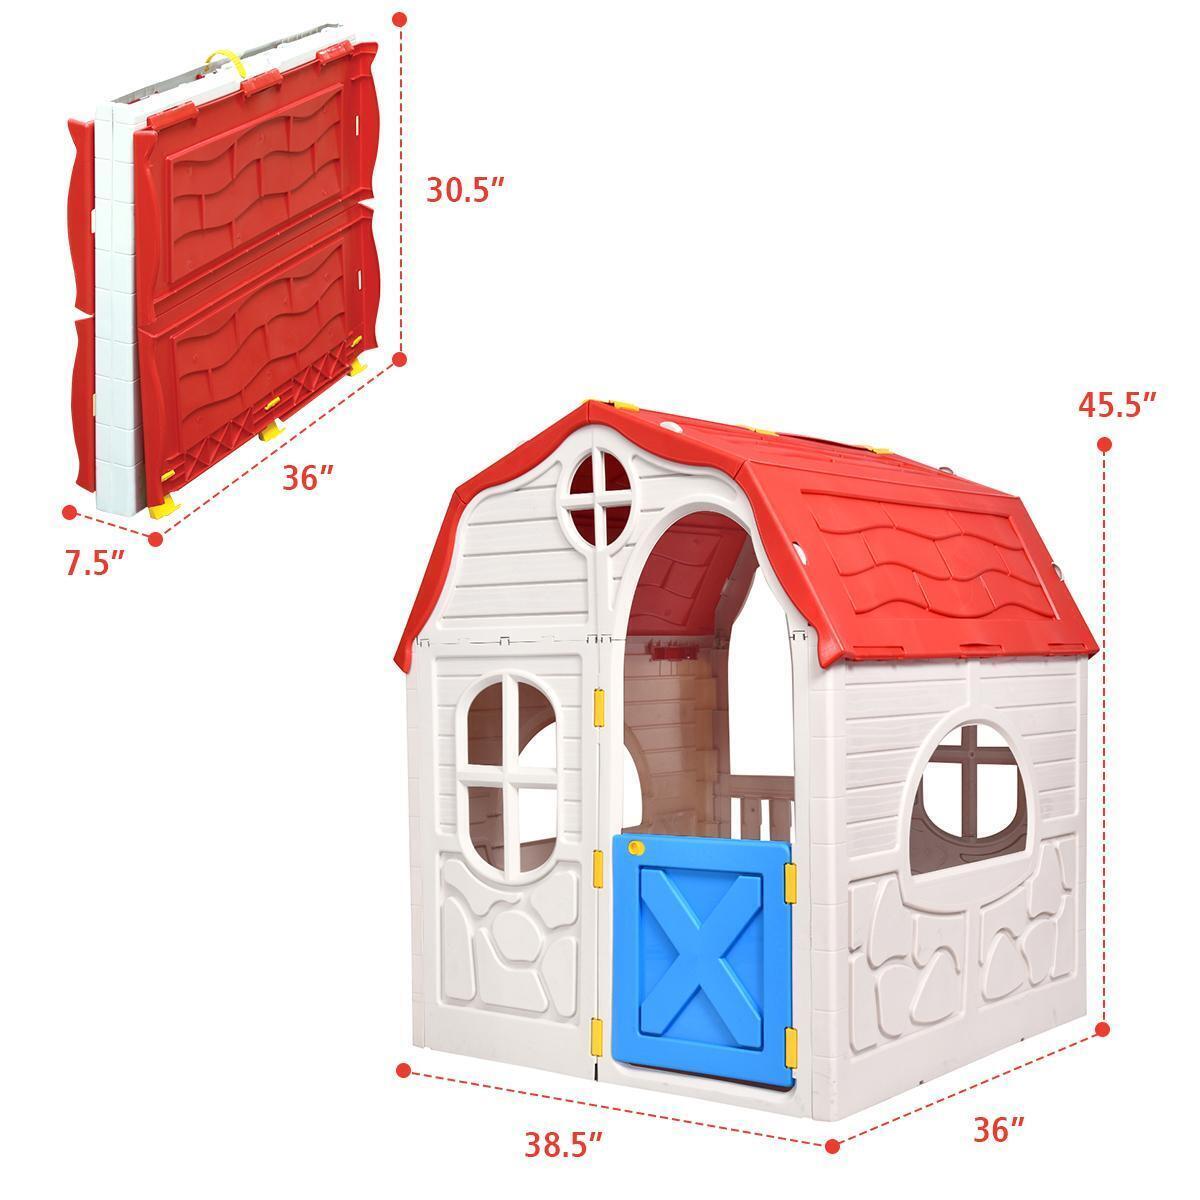 Costway Kids Cottage Playhouse Foldable Plastic Play House Indoor Outdoor Toy Portable alternate image